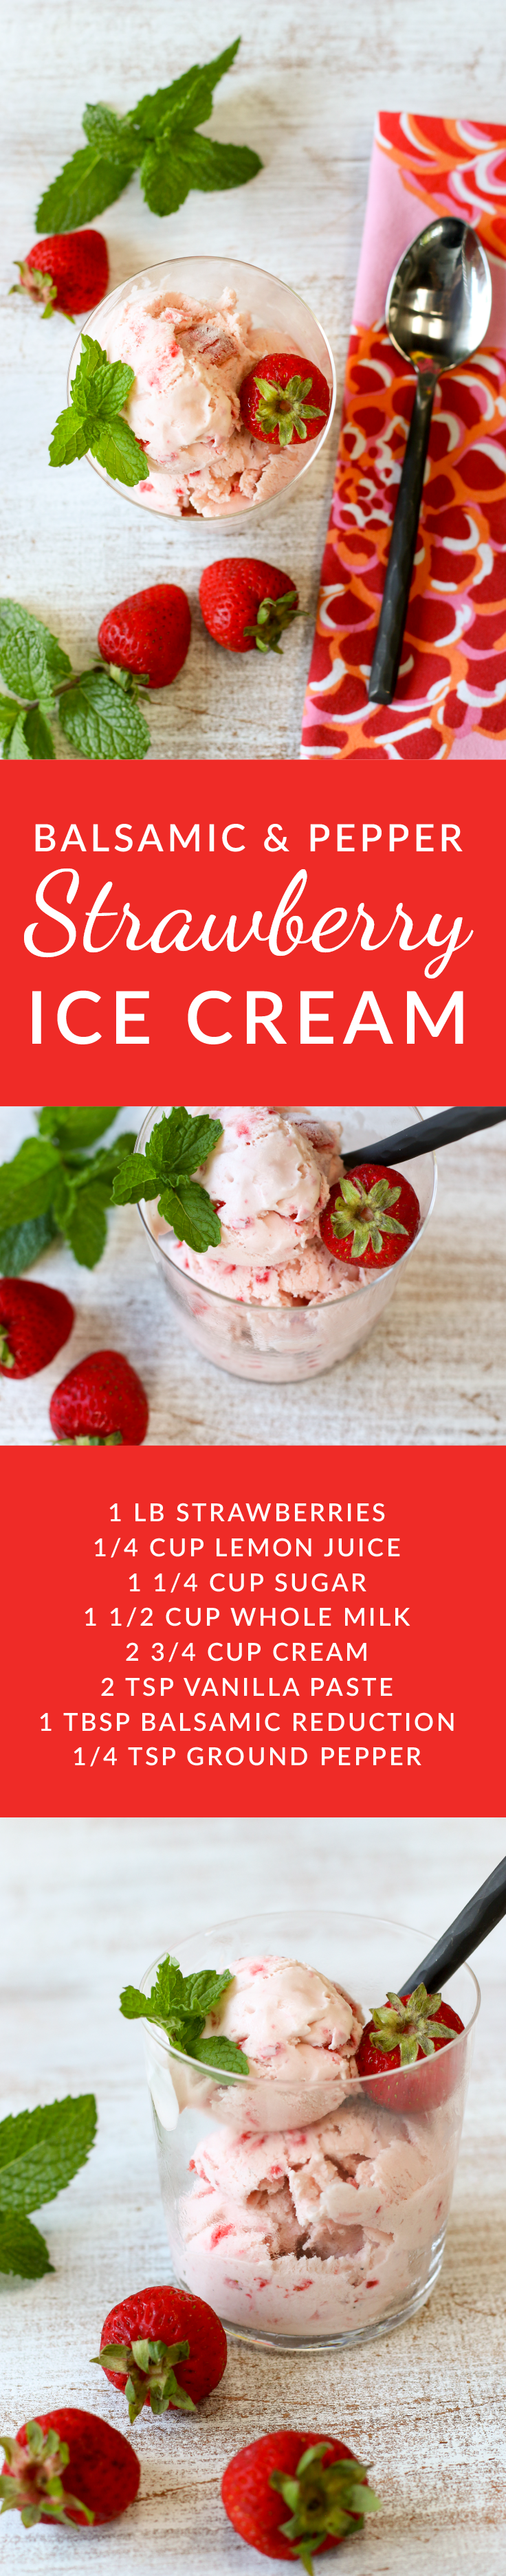 This sophisticated homemade strawberry ice cream is laced with a splash of balsamic vinegar reduction and a sprinkling of freshly ground pepper. 